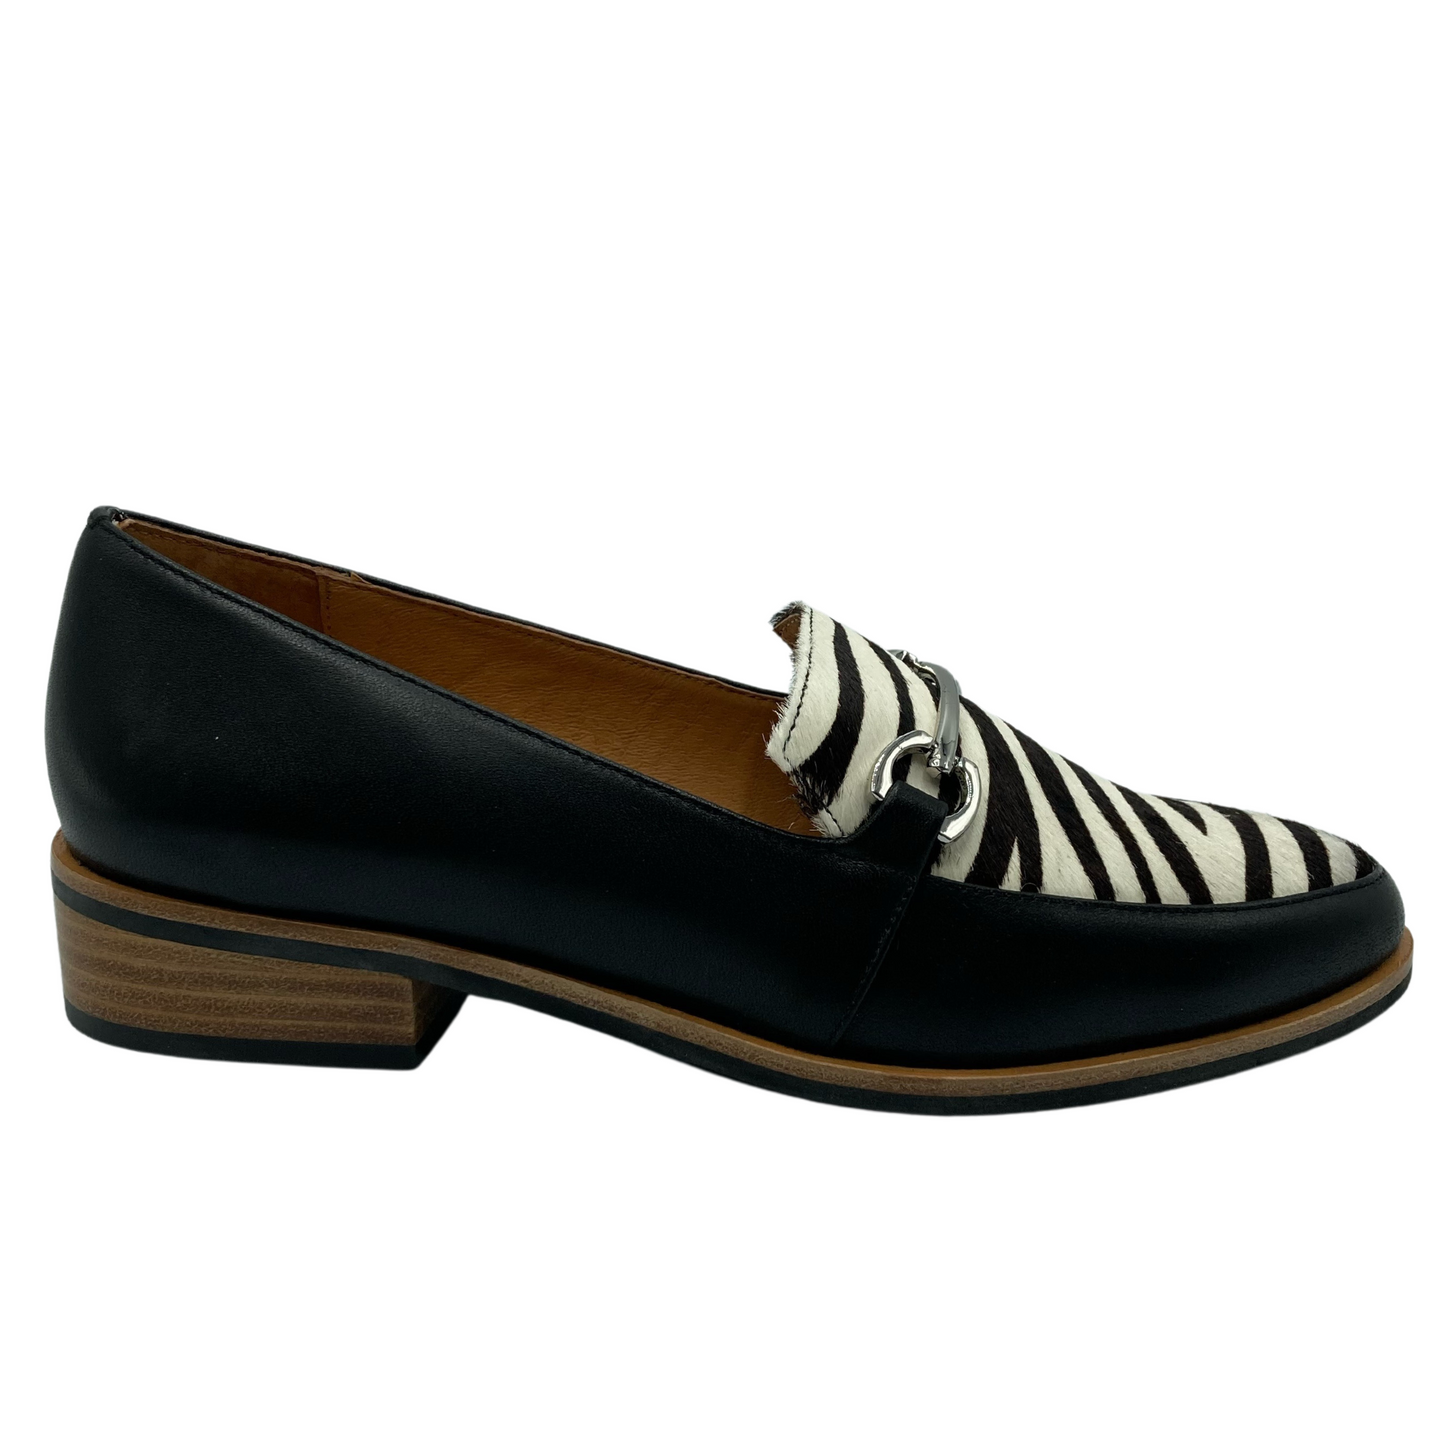 Right facing view of black and zebra print loafer with low heel and silver buckle detail on upper